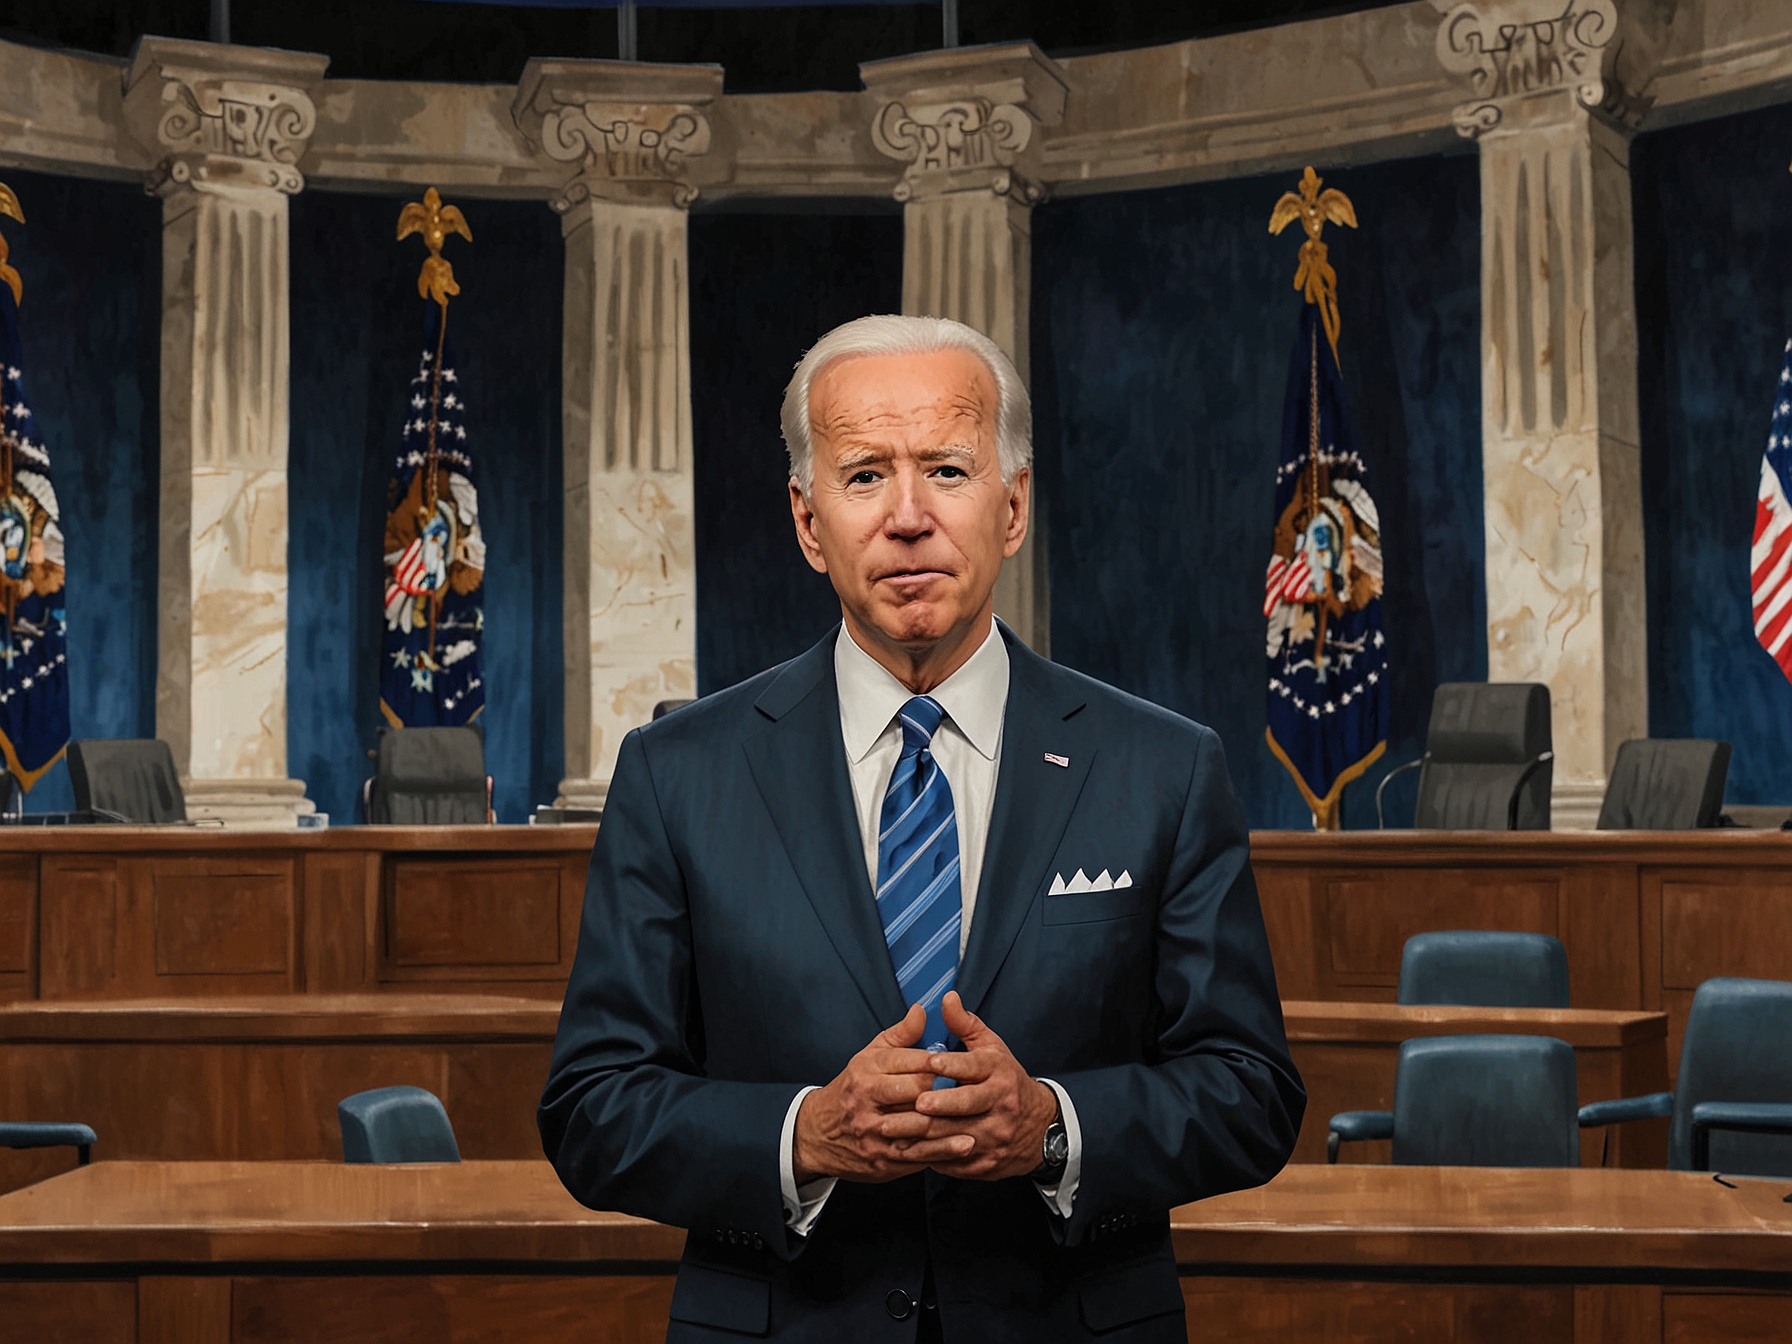 A scene of Joe Biden in a mock debate setup, countering responses with rehearsed clarity on healthcare, the economy, and COVID-19, aiming to showcase his leadership and empathy.